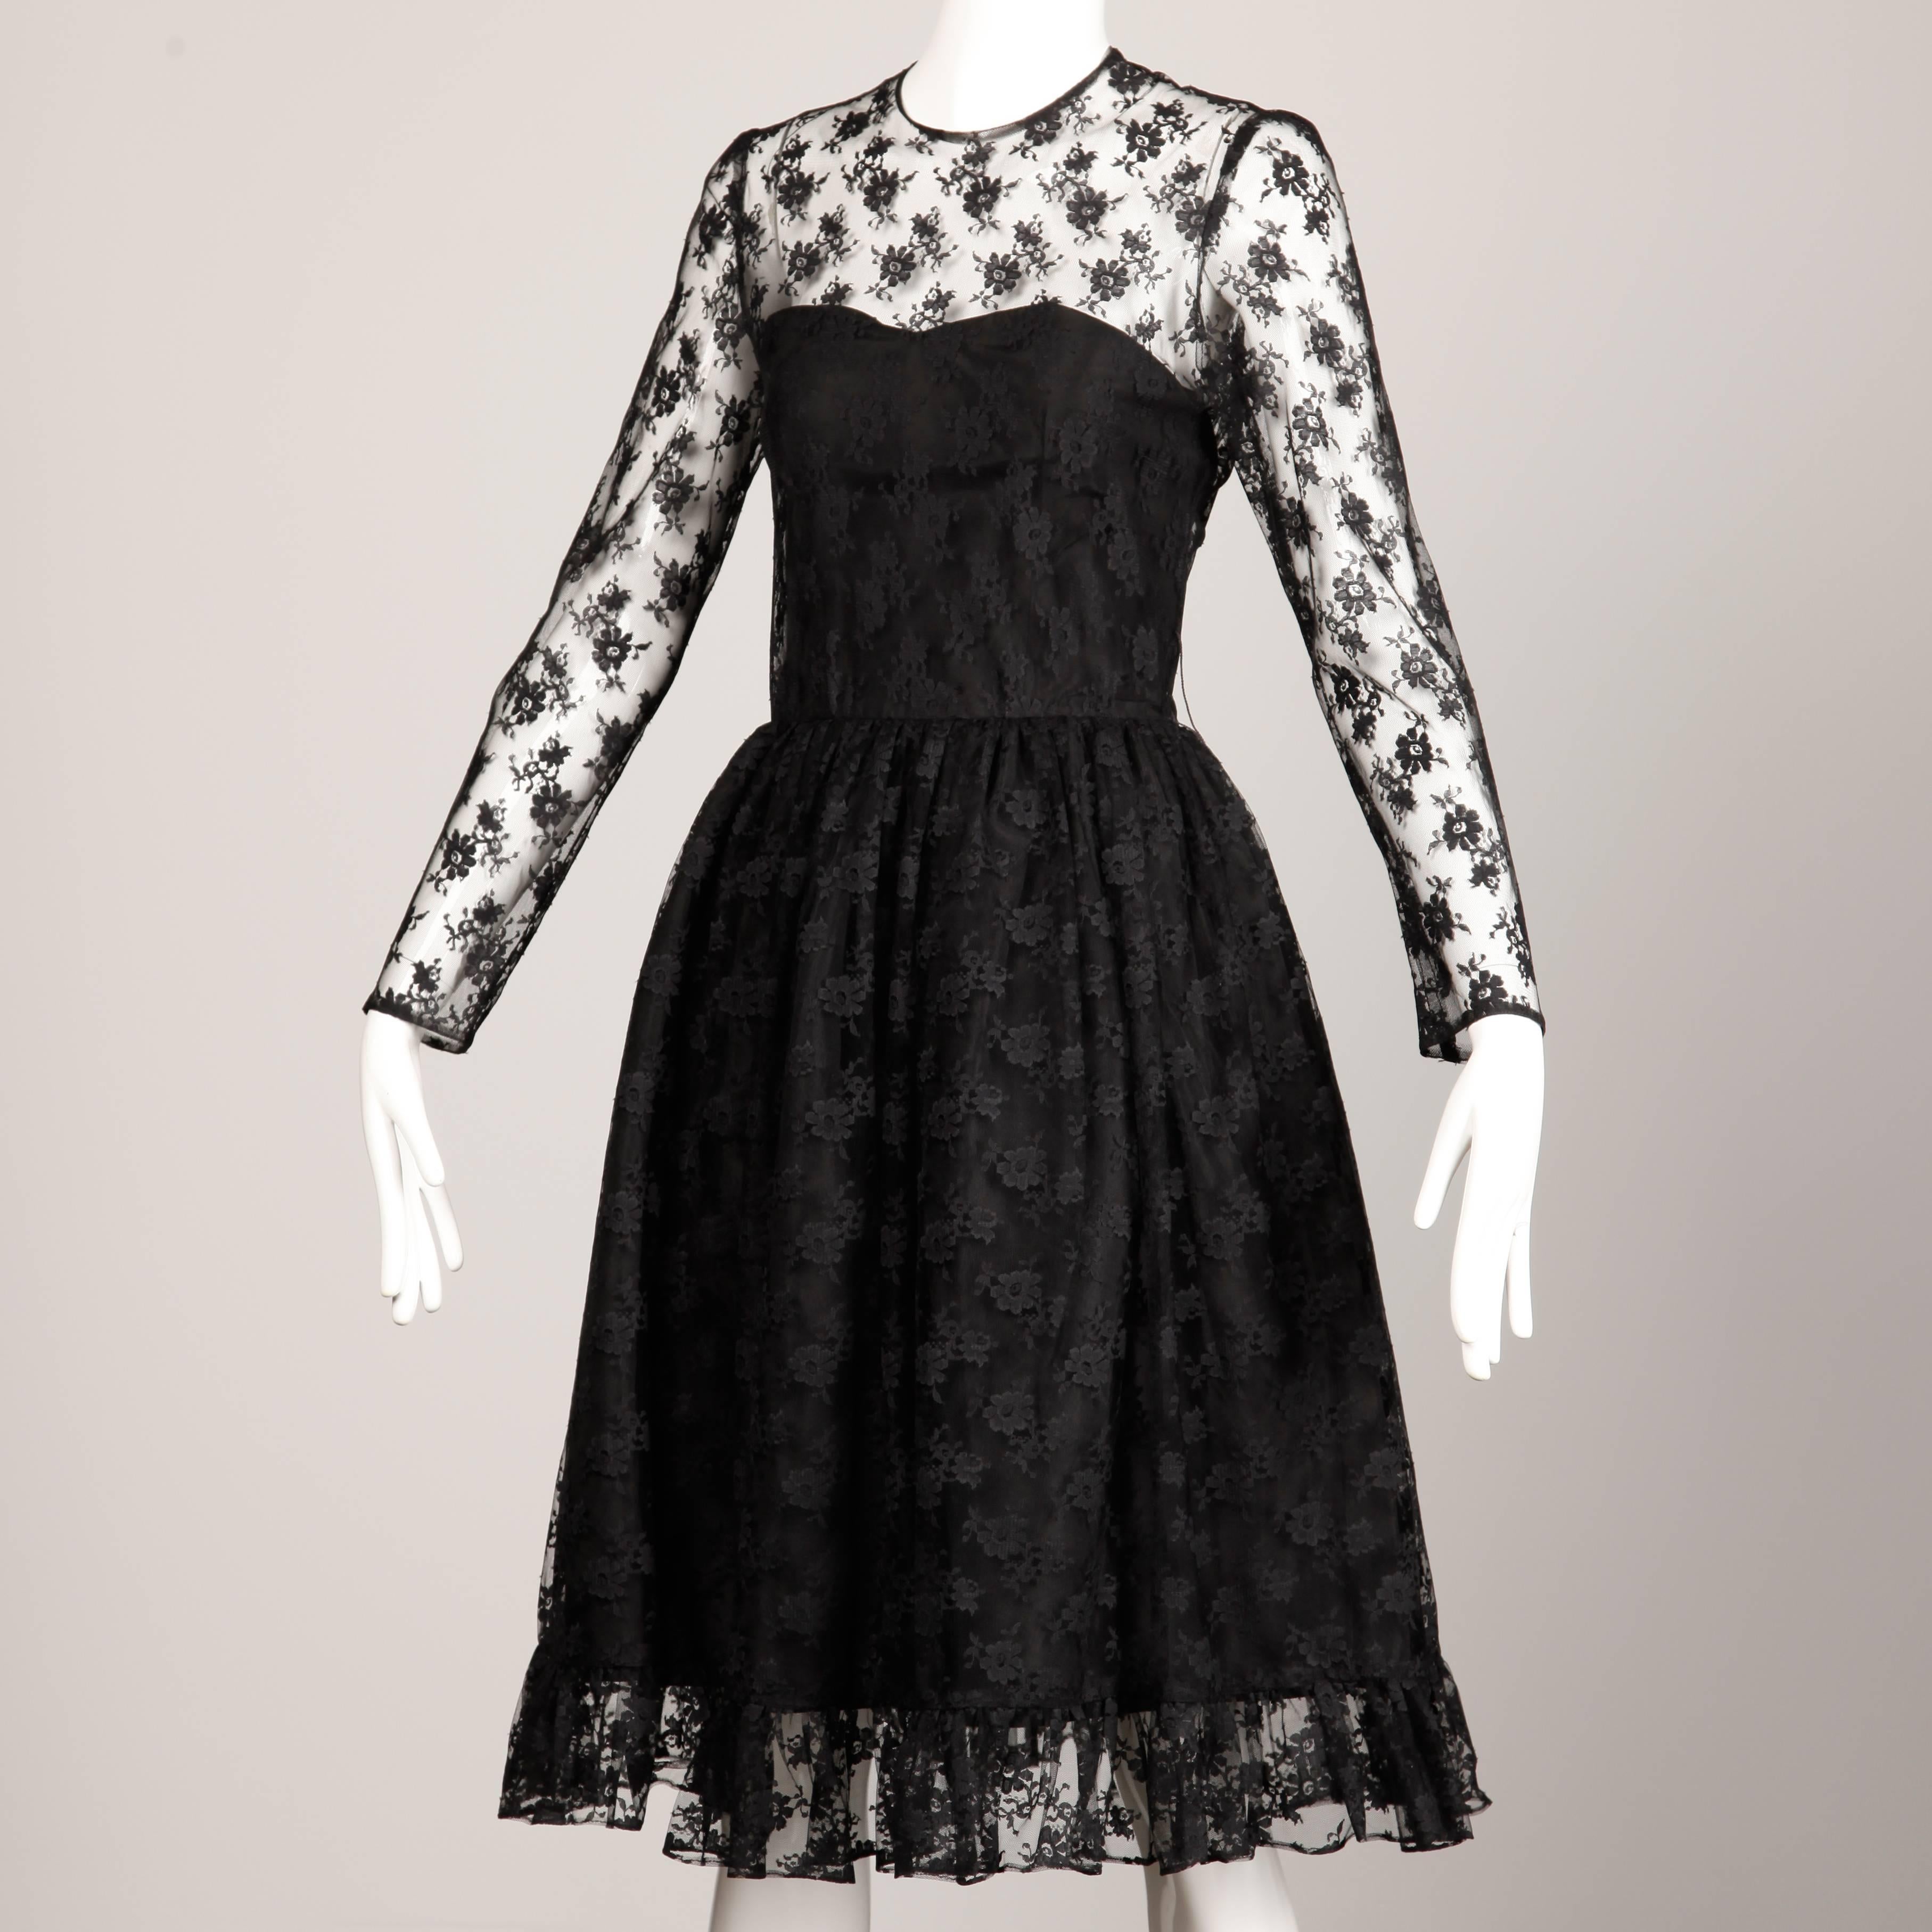 Bill Blass Vintage Sheer Black Lace Dress In Excellent Condition For Sale In Sparks, NV